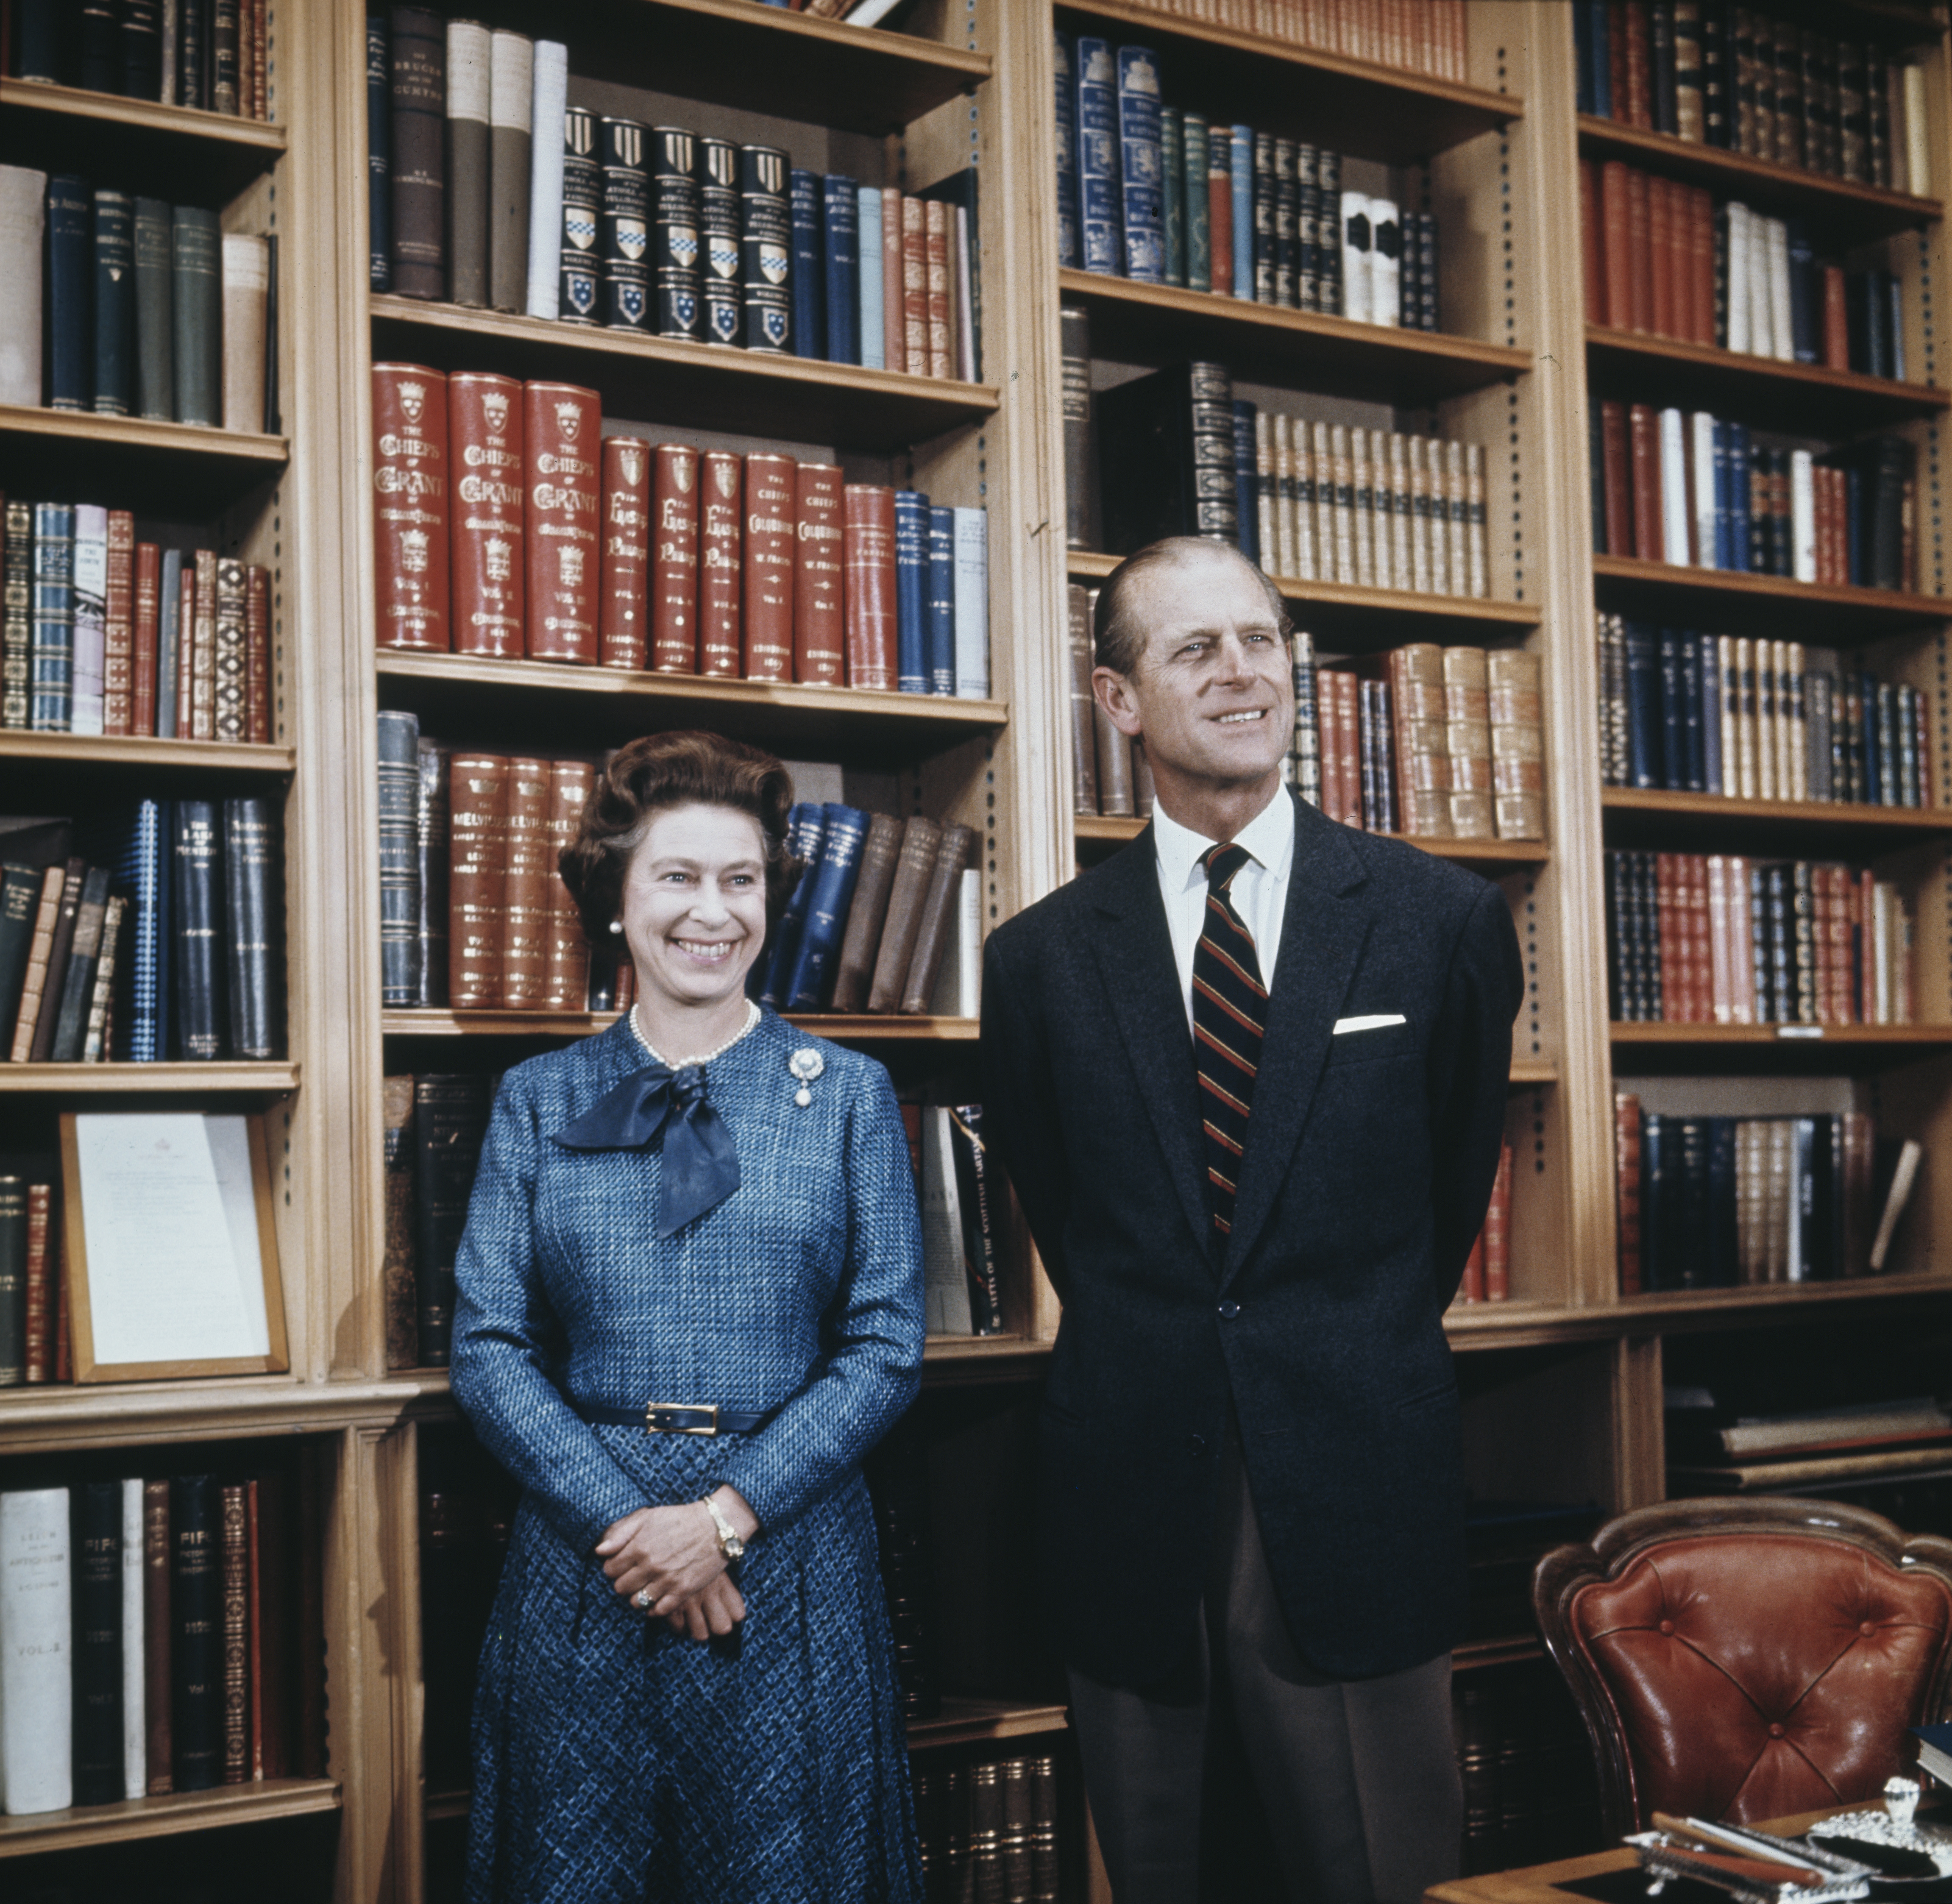 Queen Elizabeth and Prince Philip, the Duke of Edinburgh in the study at Balmoral Castle, Scotland, 26th September 1976 | Source: Getty Images